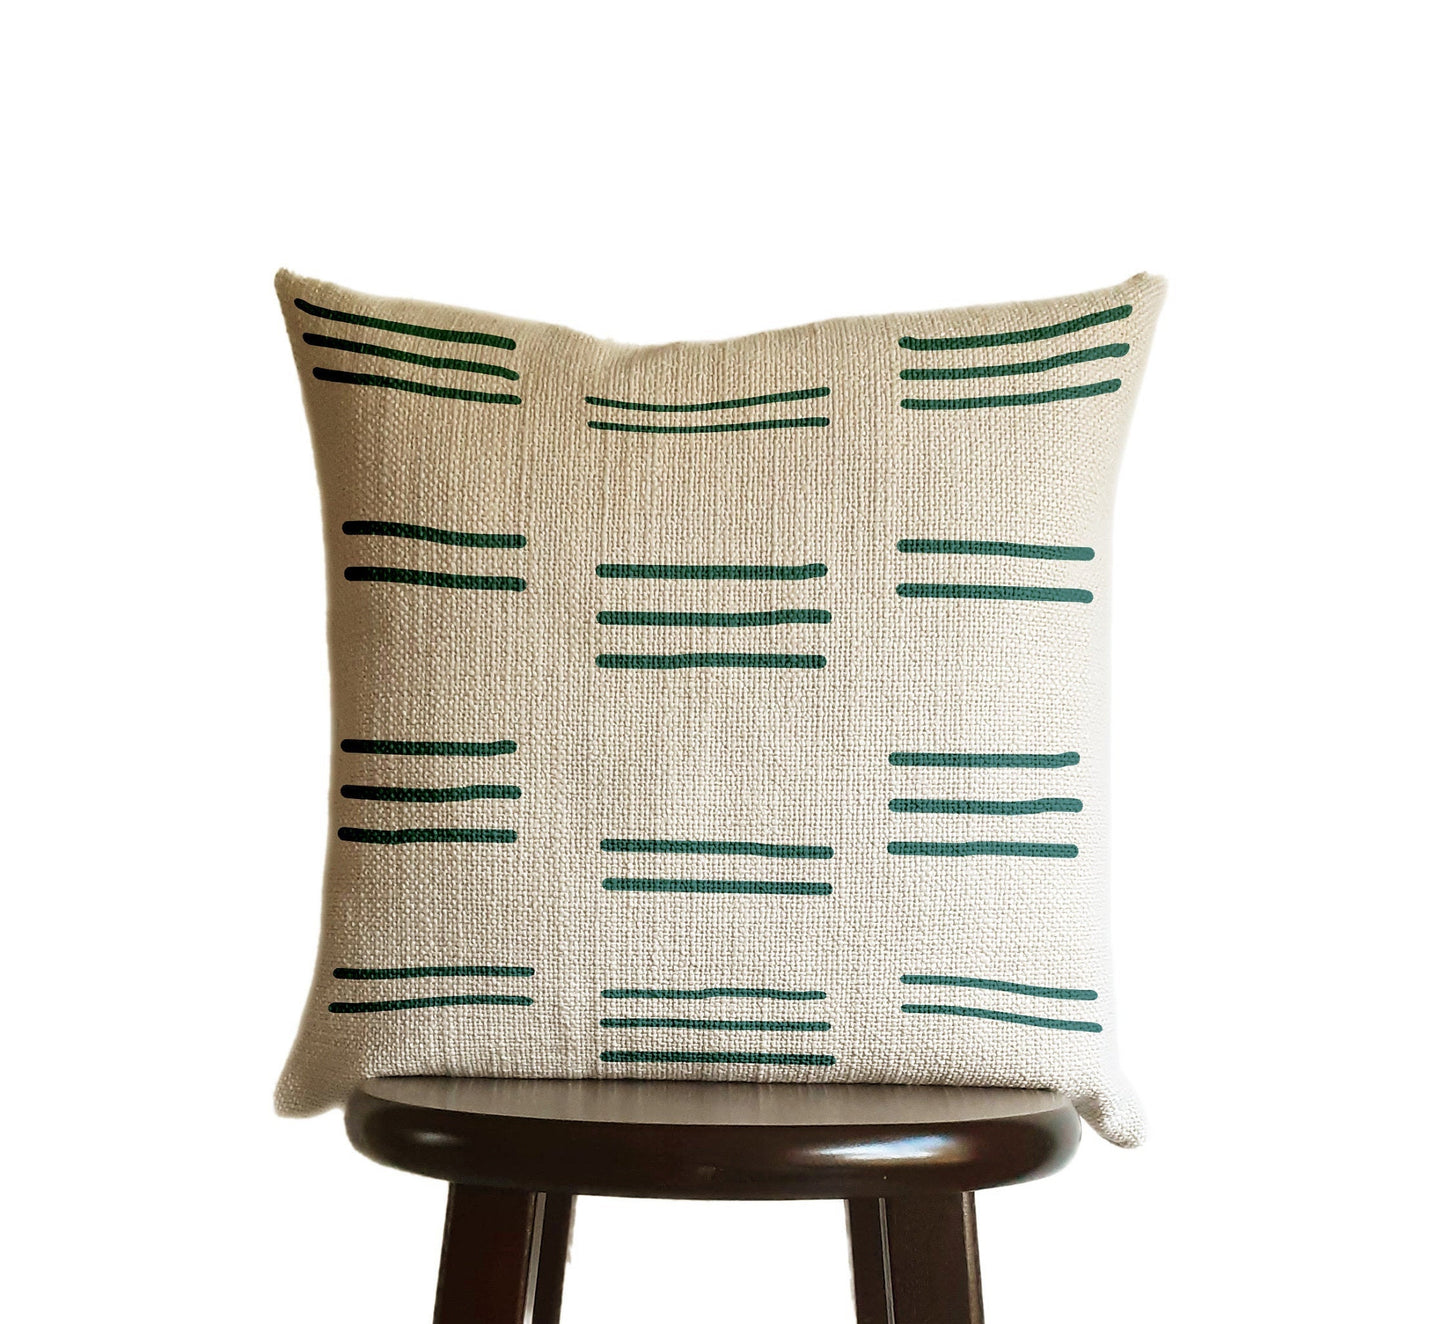 Blue Green Teal Pillow Cover, Tribal Urban Ethnic Square 18x18 in Natural Oatmeal Color Textured Woven Fabric in Modern Boho Home Decor